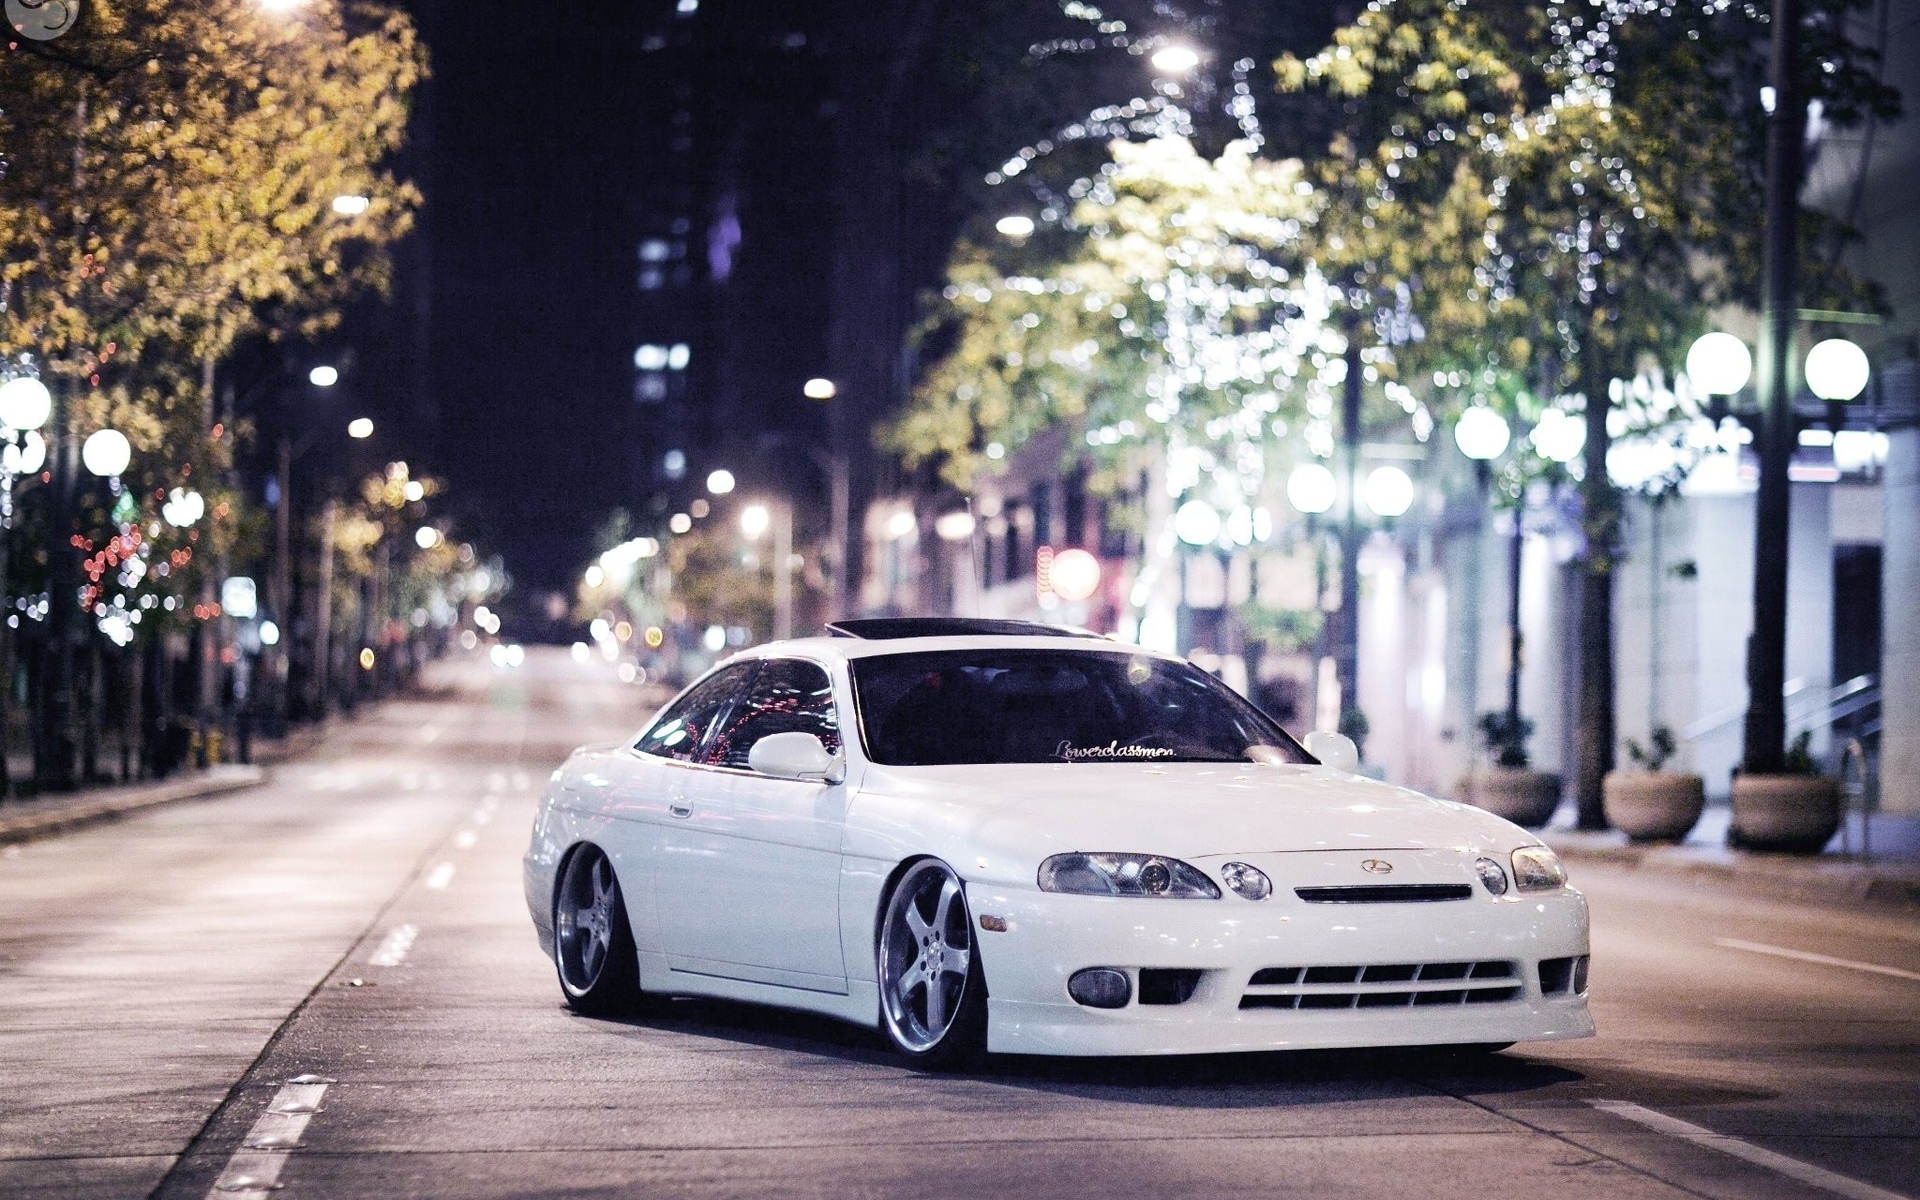 lexus, Sc400, Vehicles, Cars, Auto, Tuning, Stance, Roads, Street, Architecture, Buildings, Night, Lights, Stance, Wheels, Tint, Trees, White Wallpaper